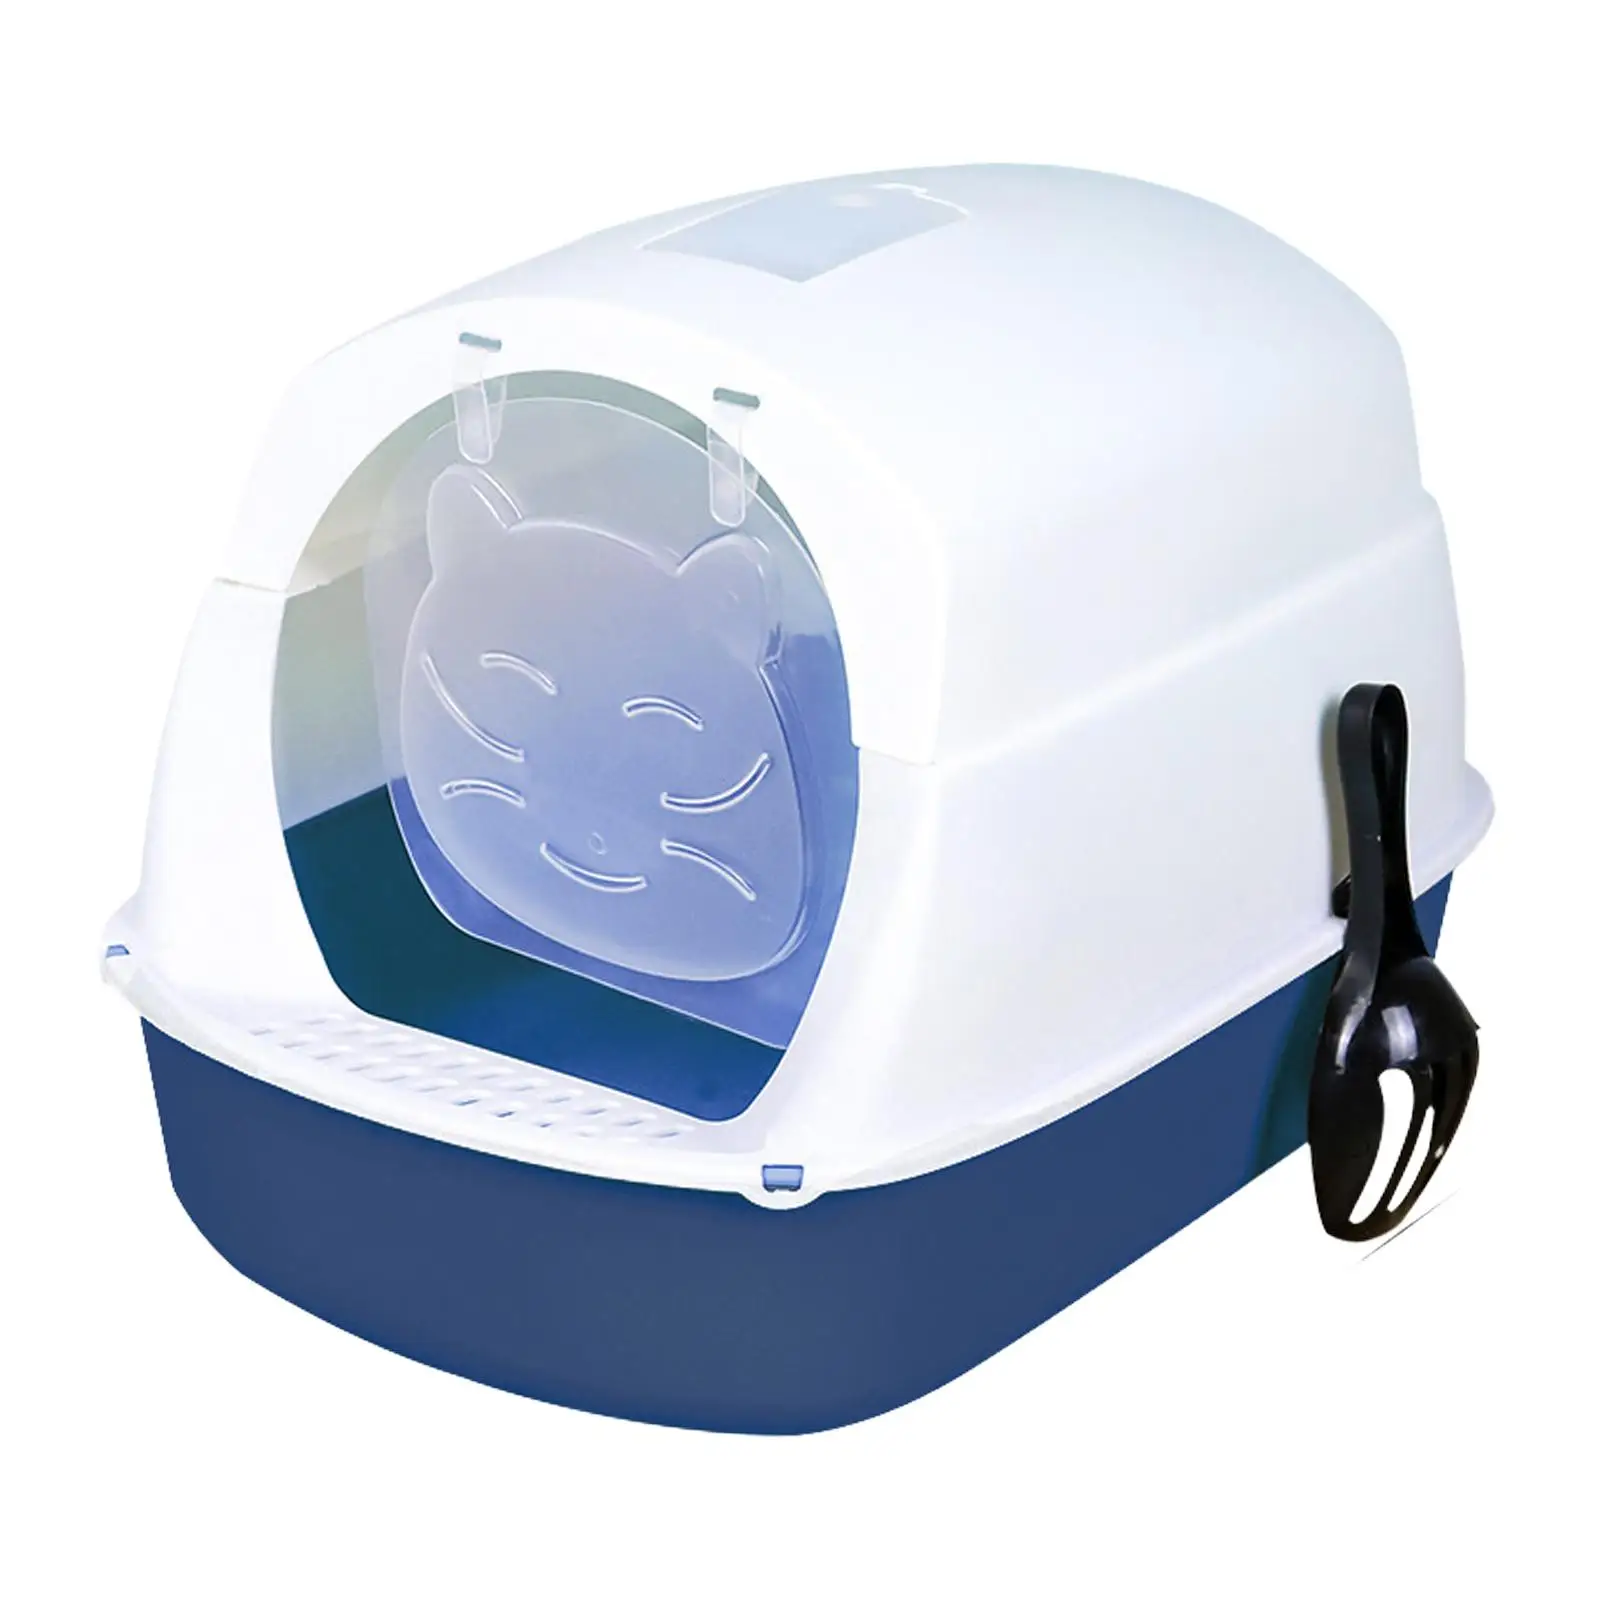 Hooded Cat Litter Box with Lid Fully Enclosed Cat Toilet Large Cat Litter Box Durable with Door Pet Litter Box Pet Supplies